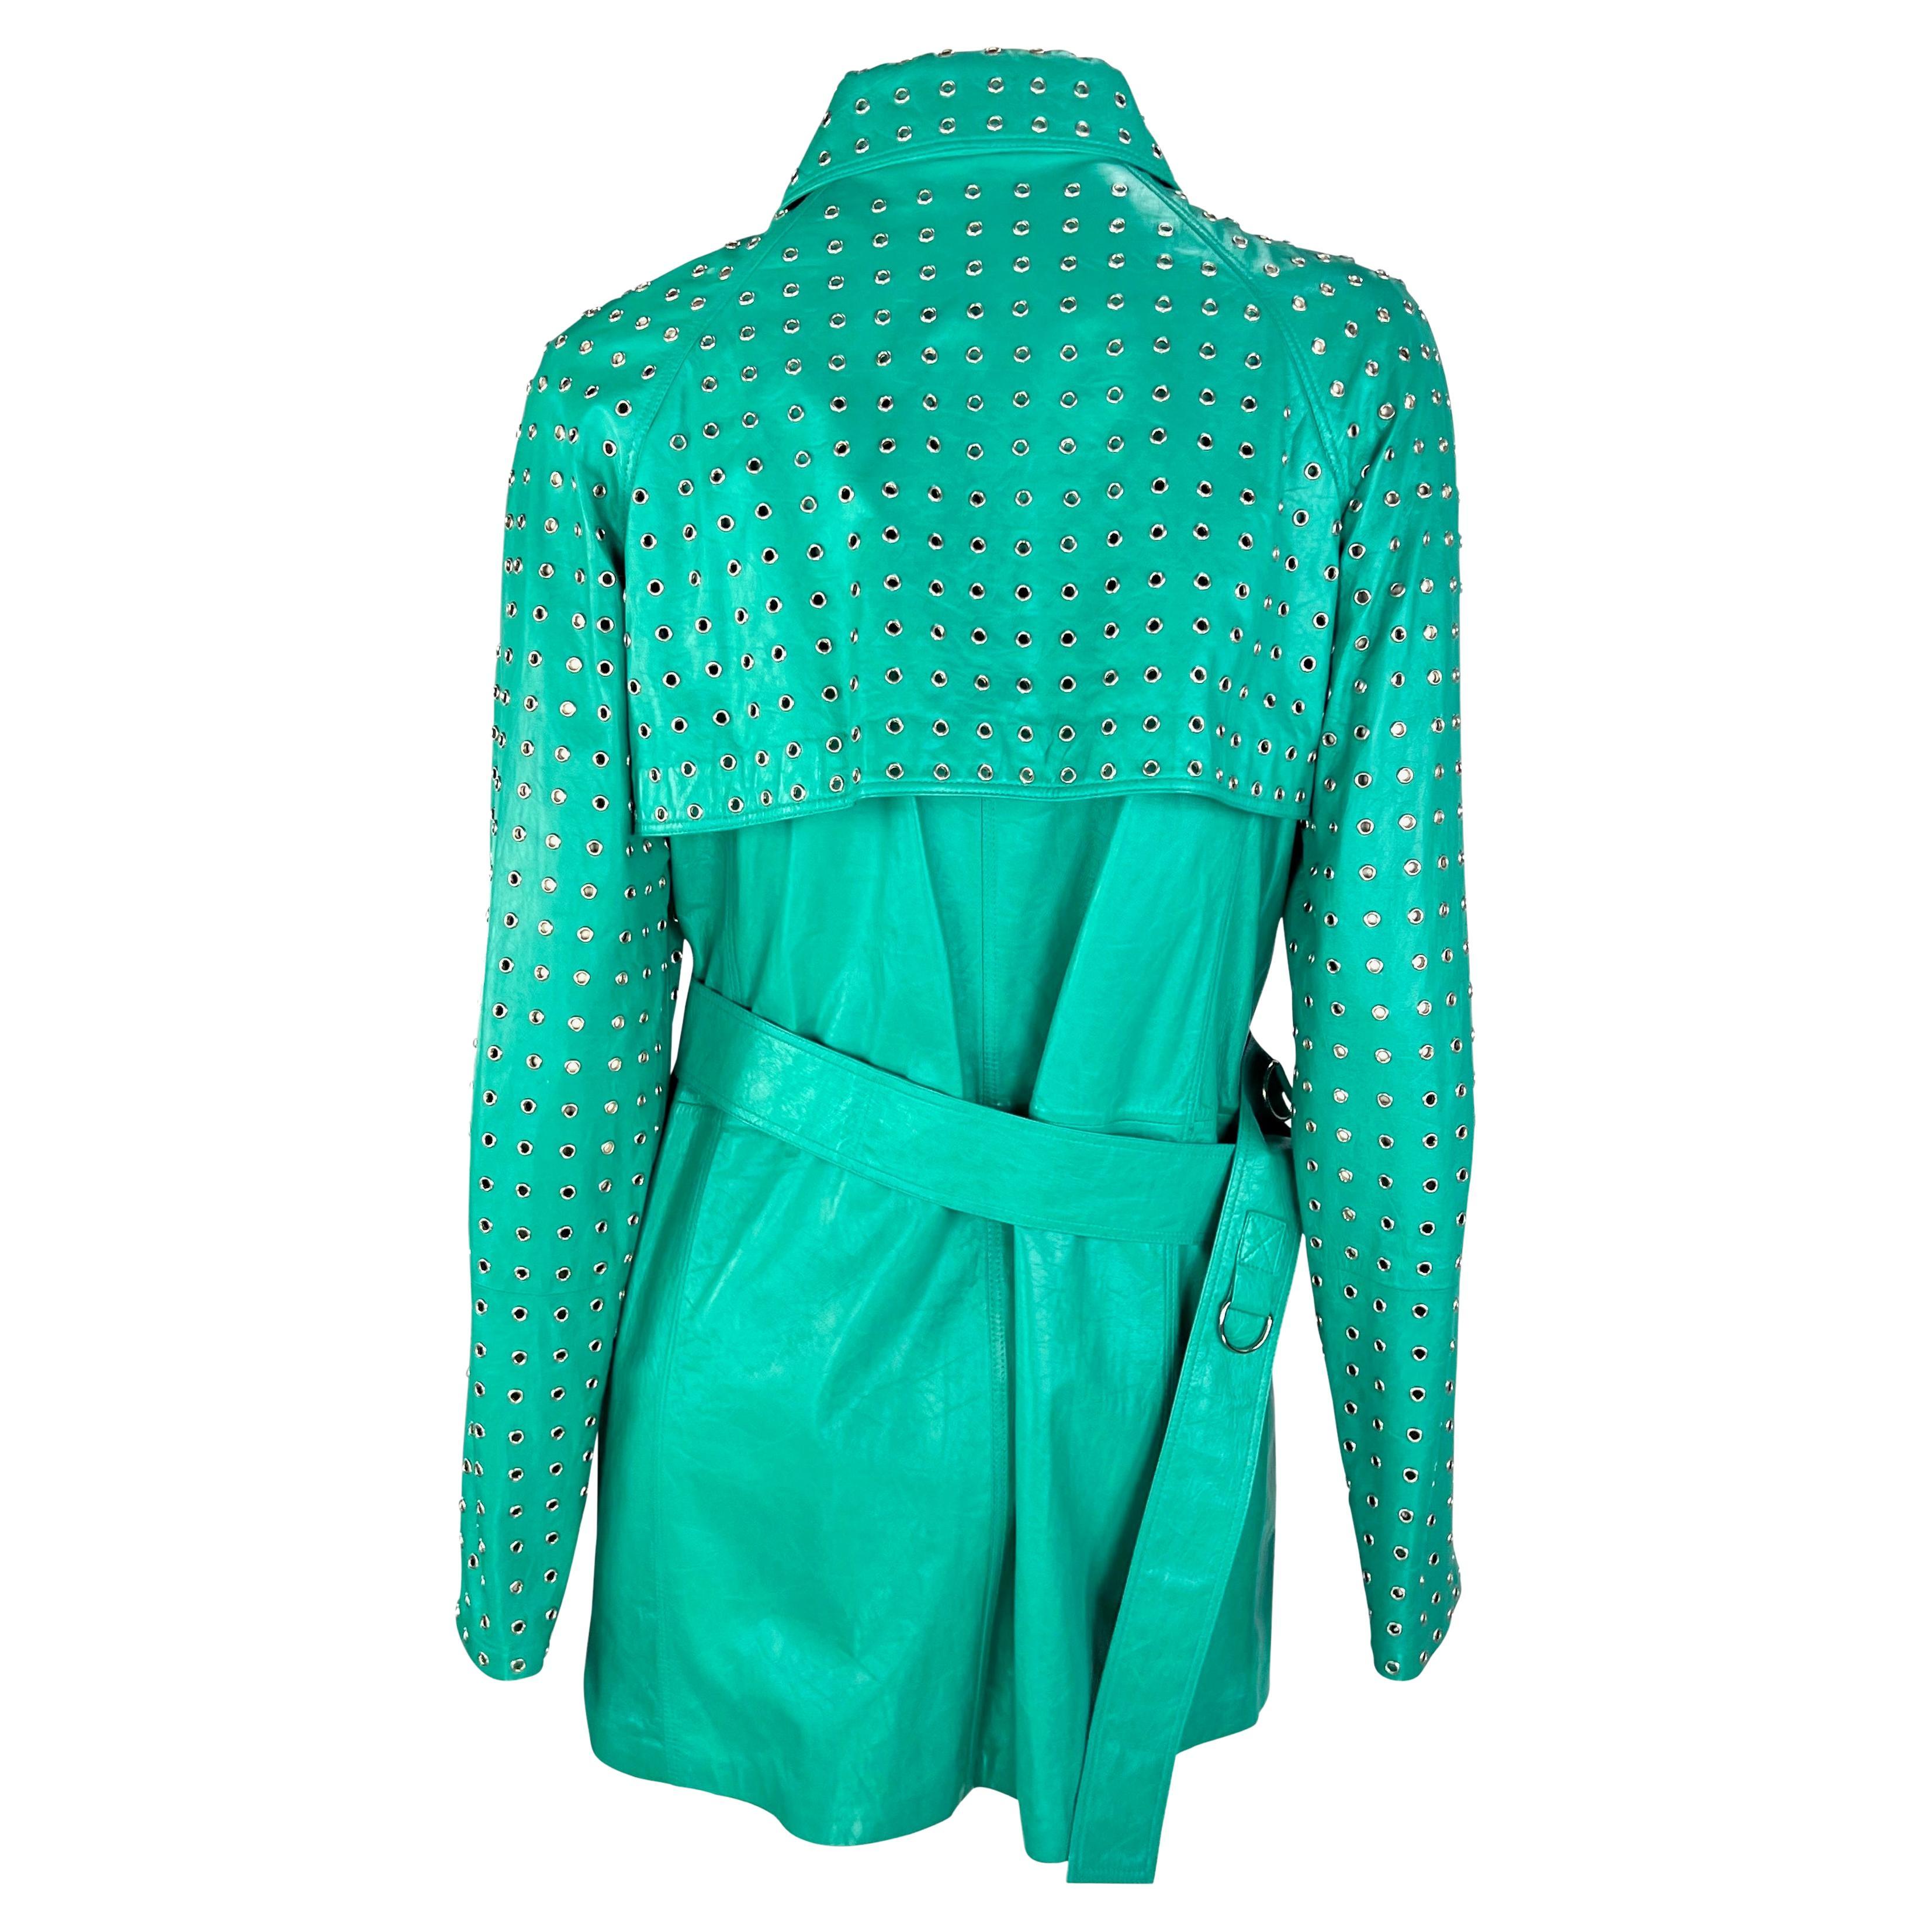 NWT S/S 2003 Gianni Versace by Donatella Versace Teal Rivet Leather Jacket For Sale 2